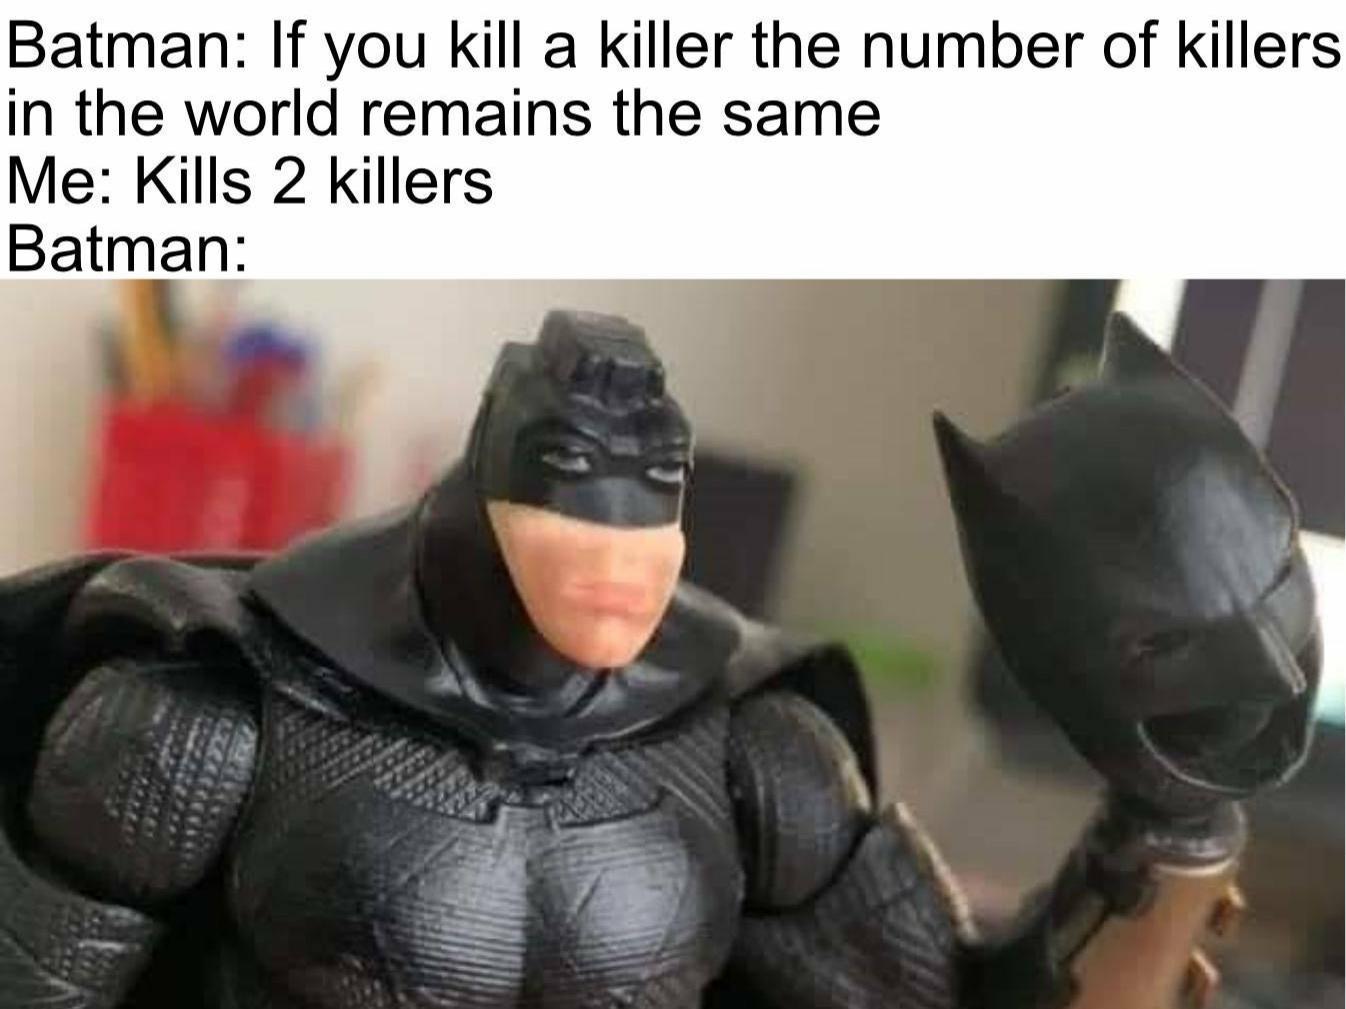 photo caption - Batman If you kill a killer the number of killers in the world remains the same Me Kills 2 killers Batman